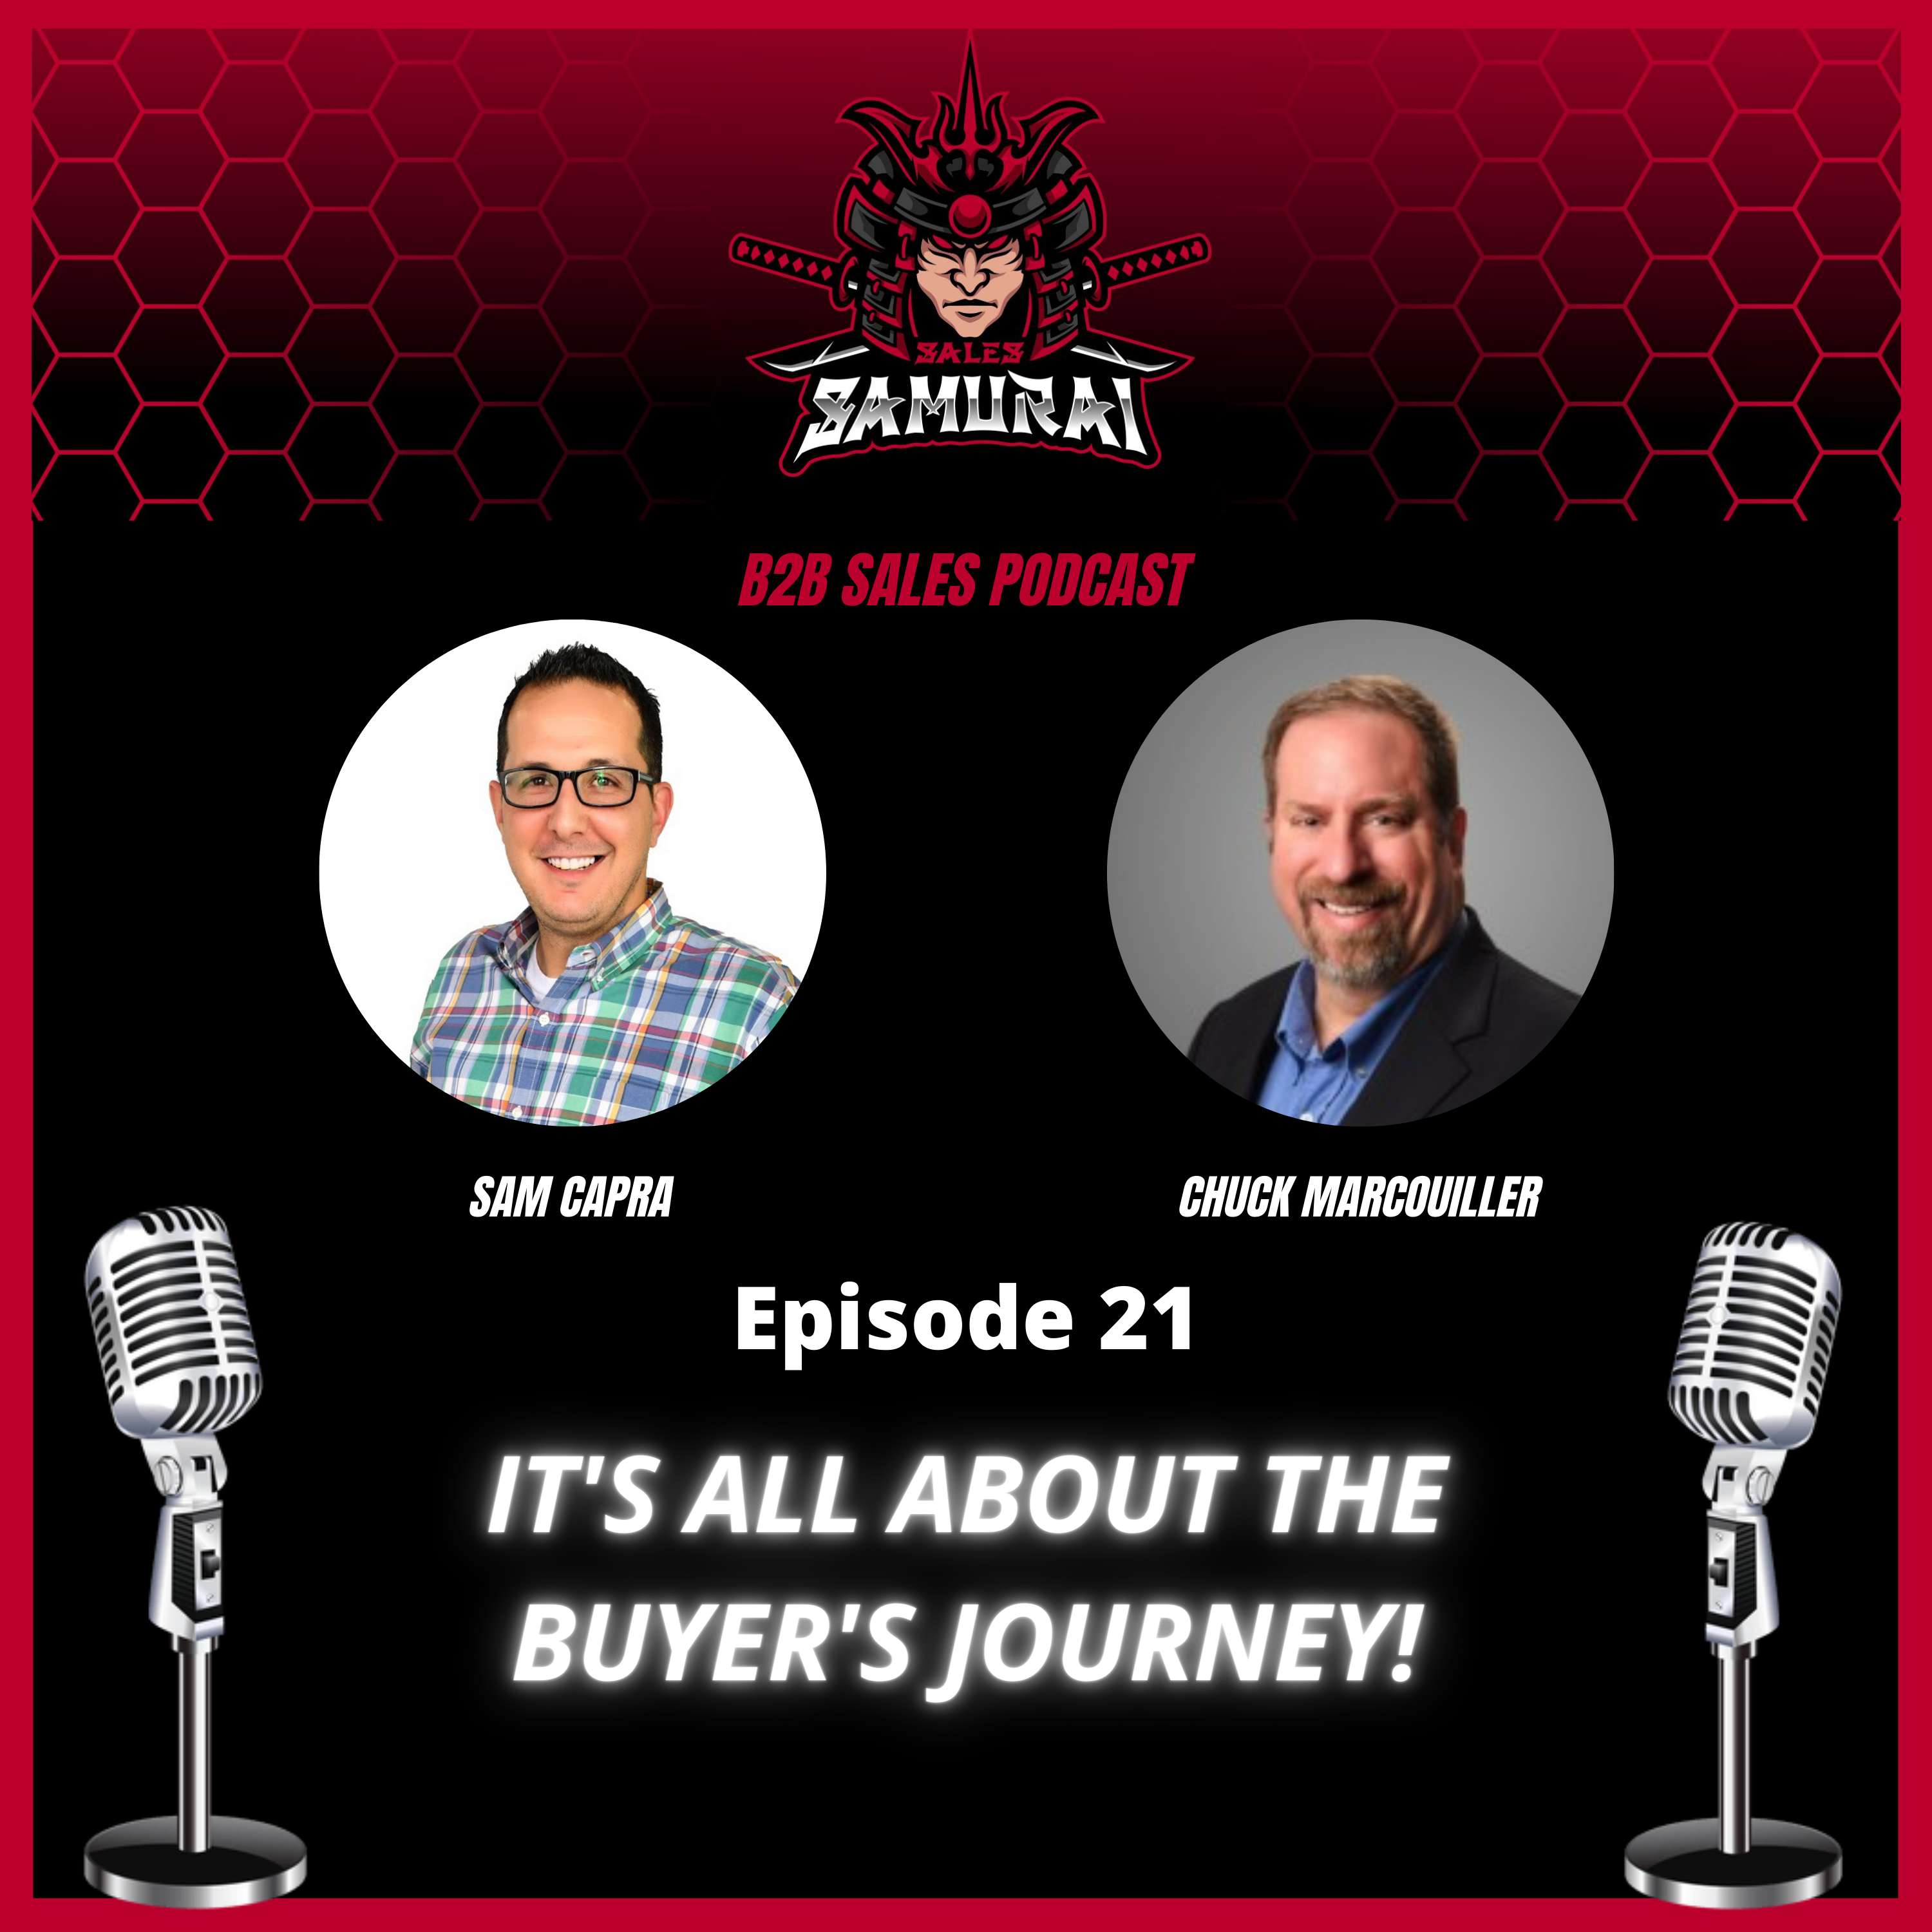 It's all About the Buyer's Journey! with Chuck Marcouiller